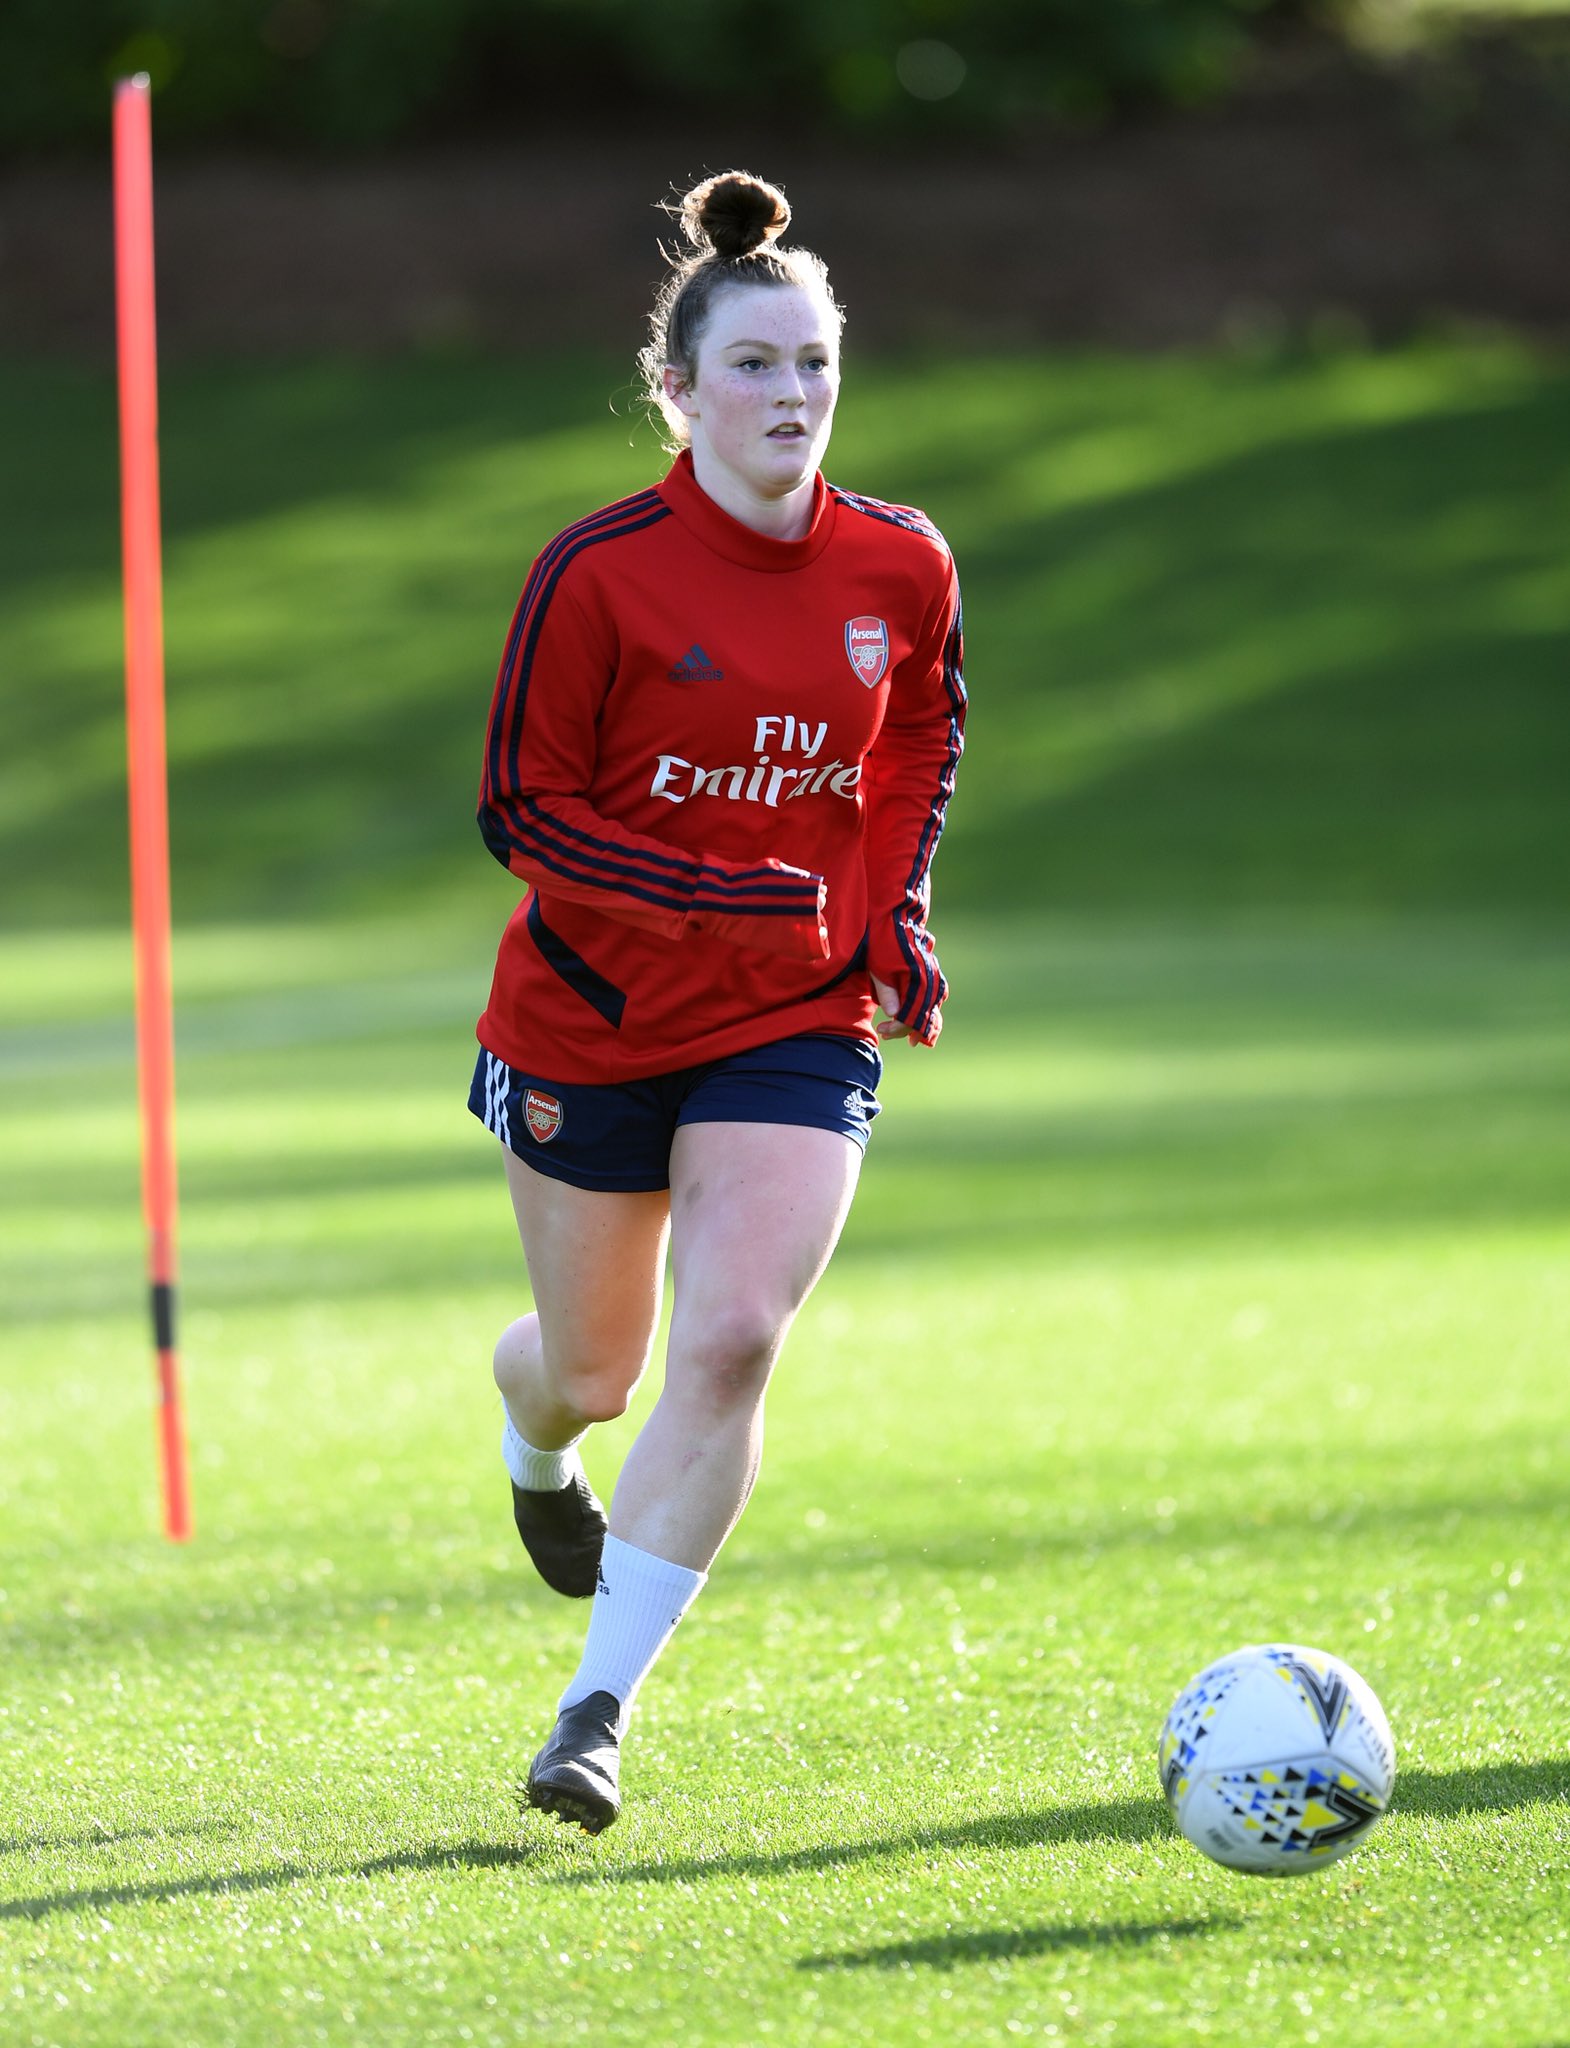 Arsenal Women On Twitter Congratulations To Ruby Mace On Being Named In Her First Senior Matchday Squad Still Just 16 Years Of Age